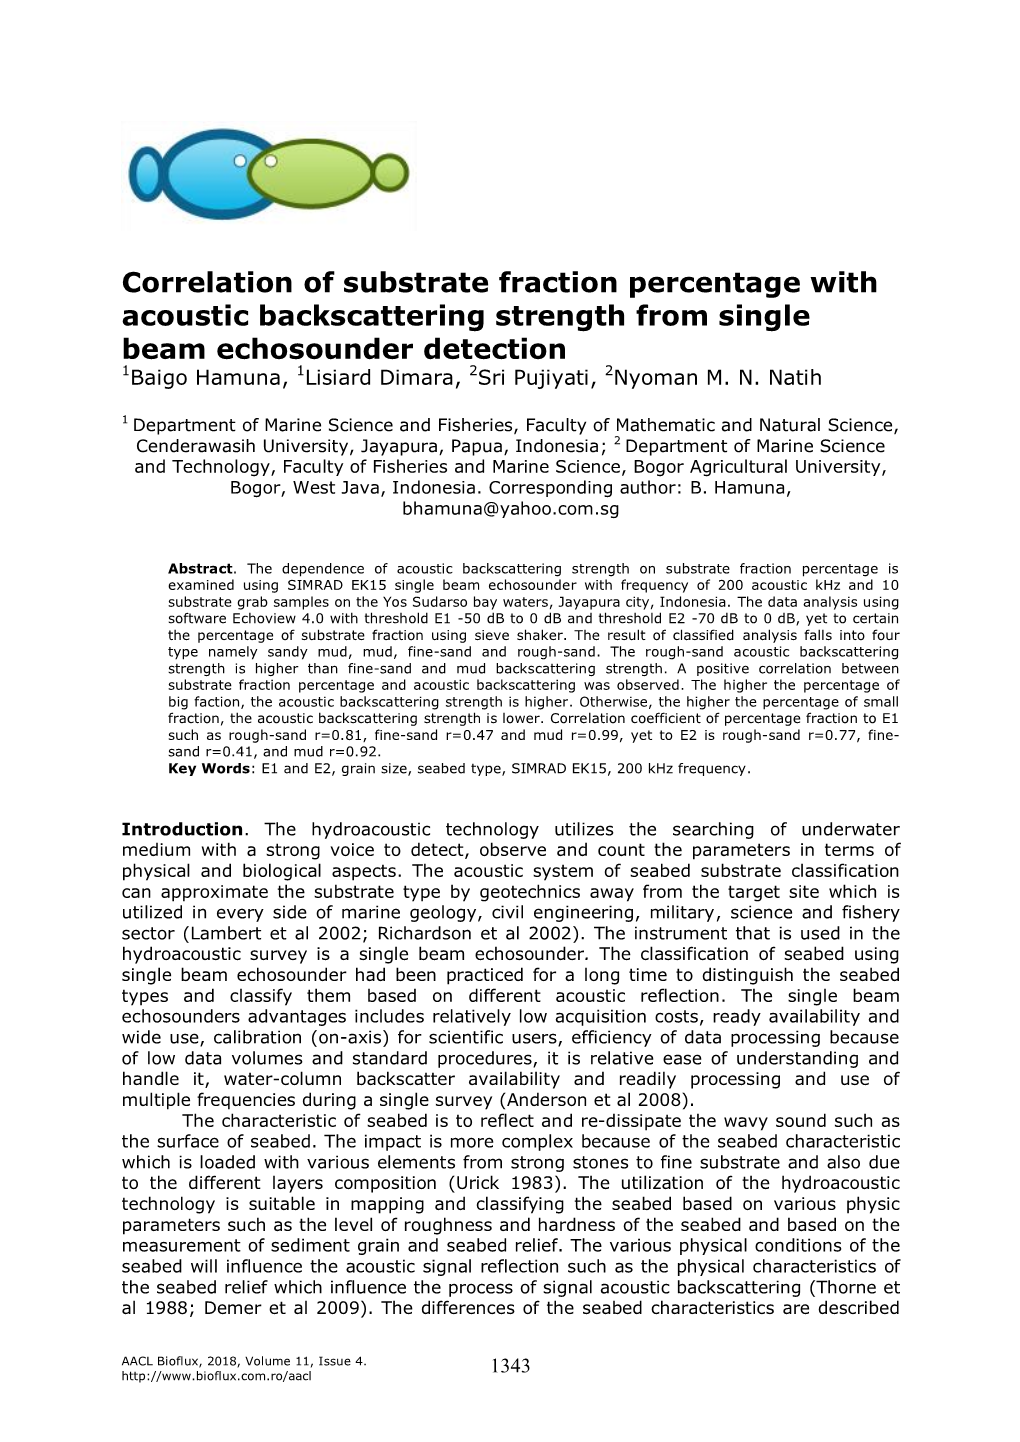 Correlation of Substrate Fraction Percentage with Acoustic